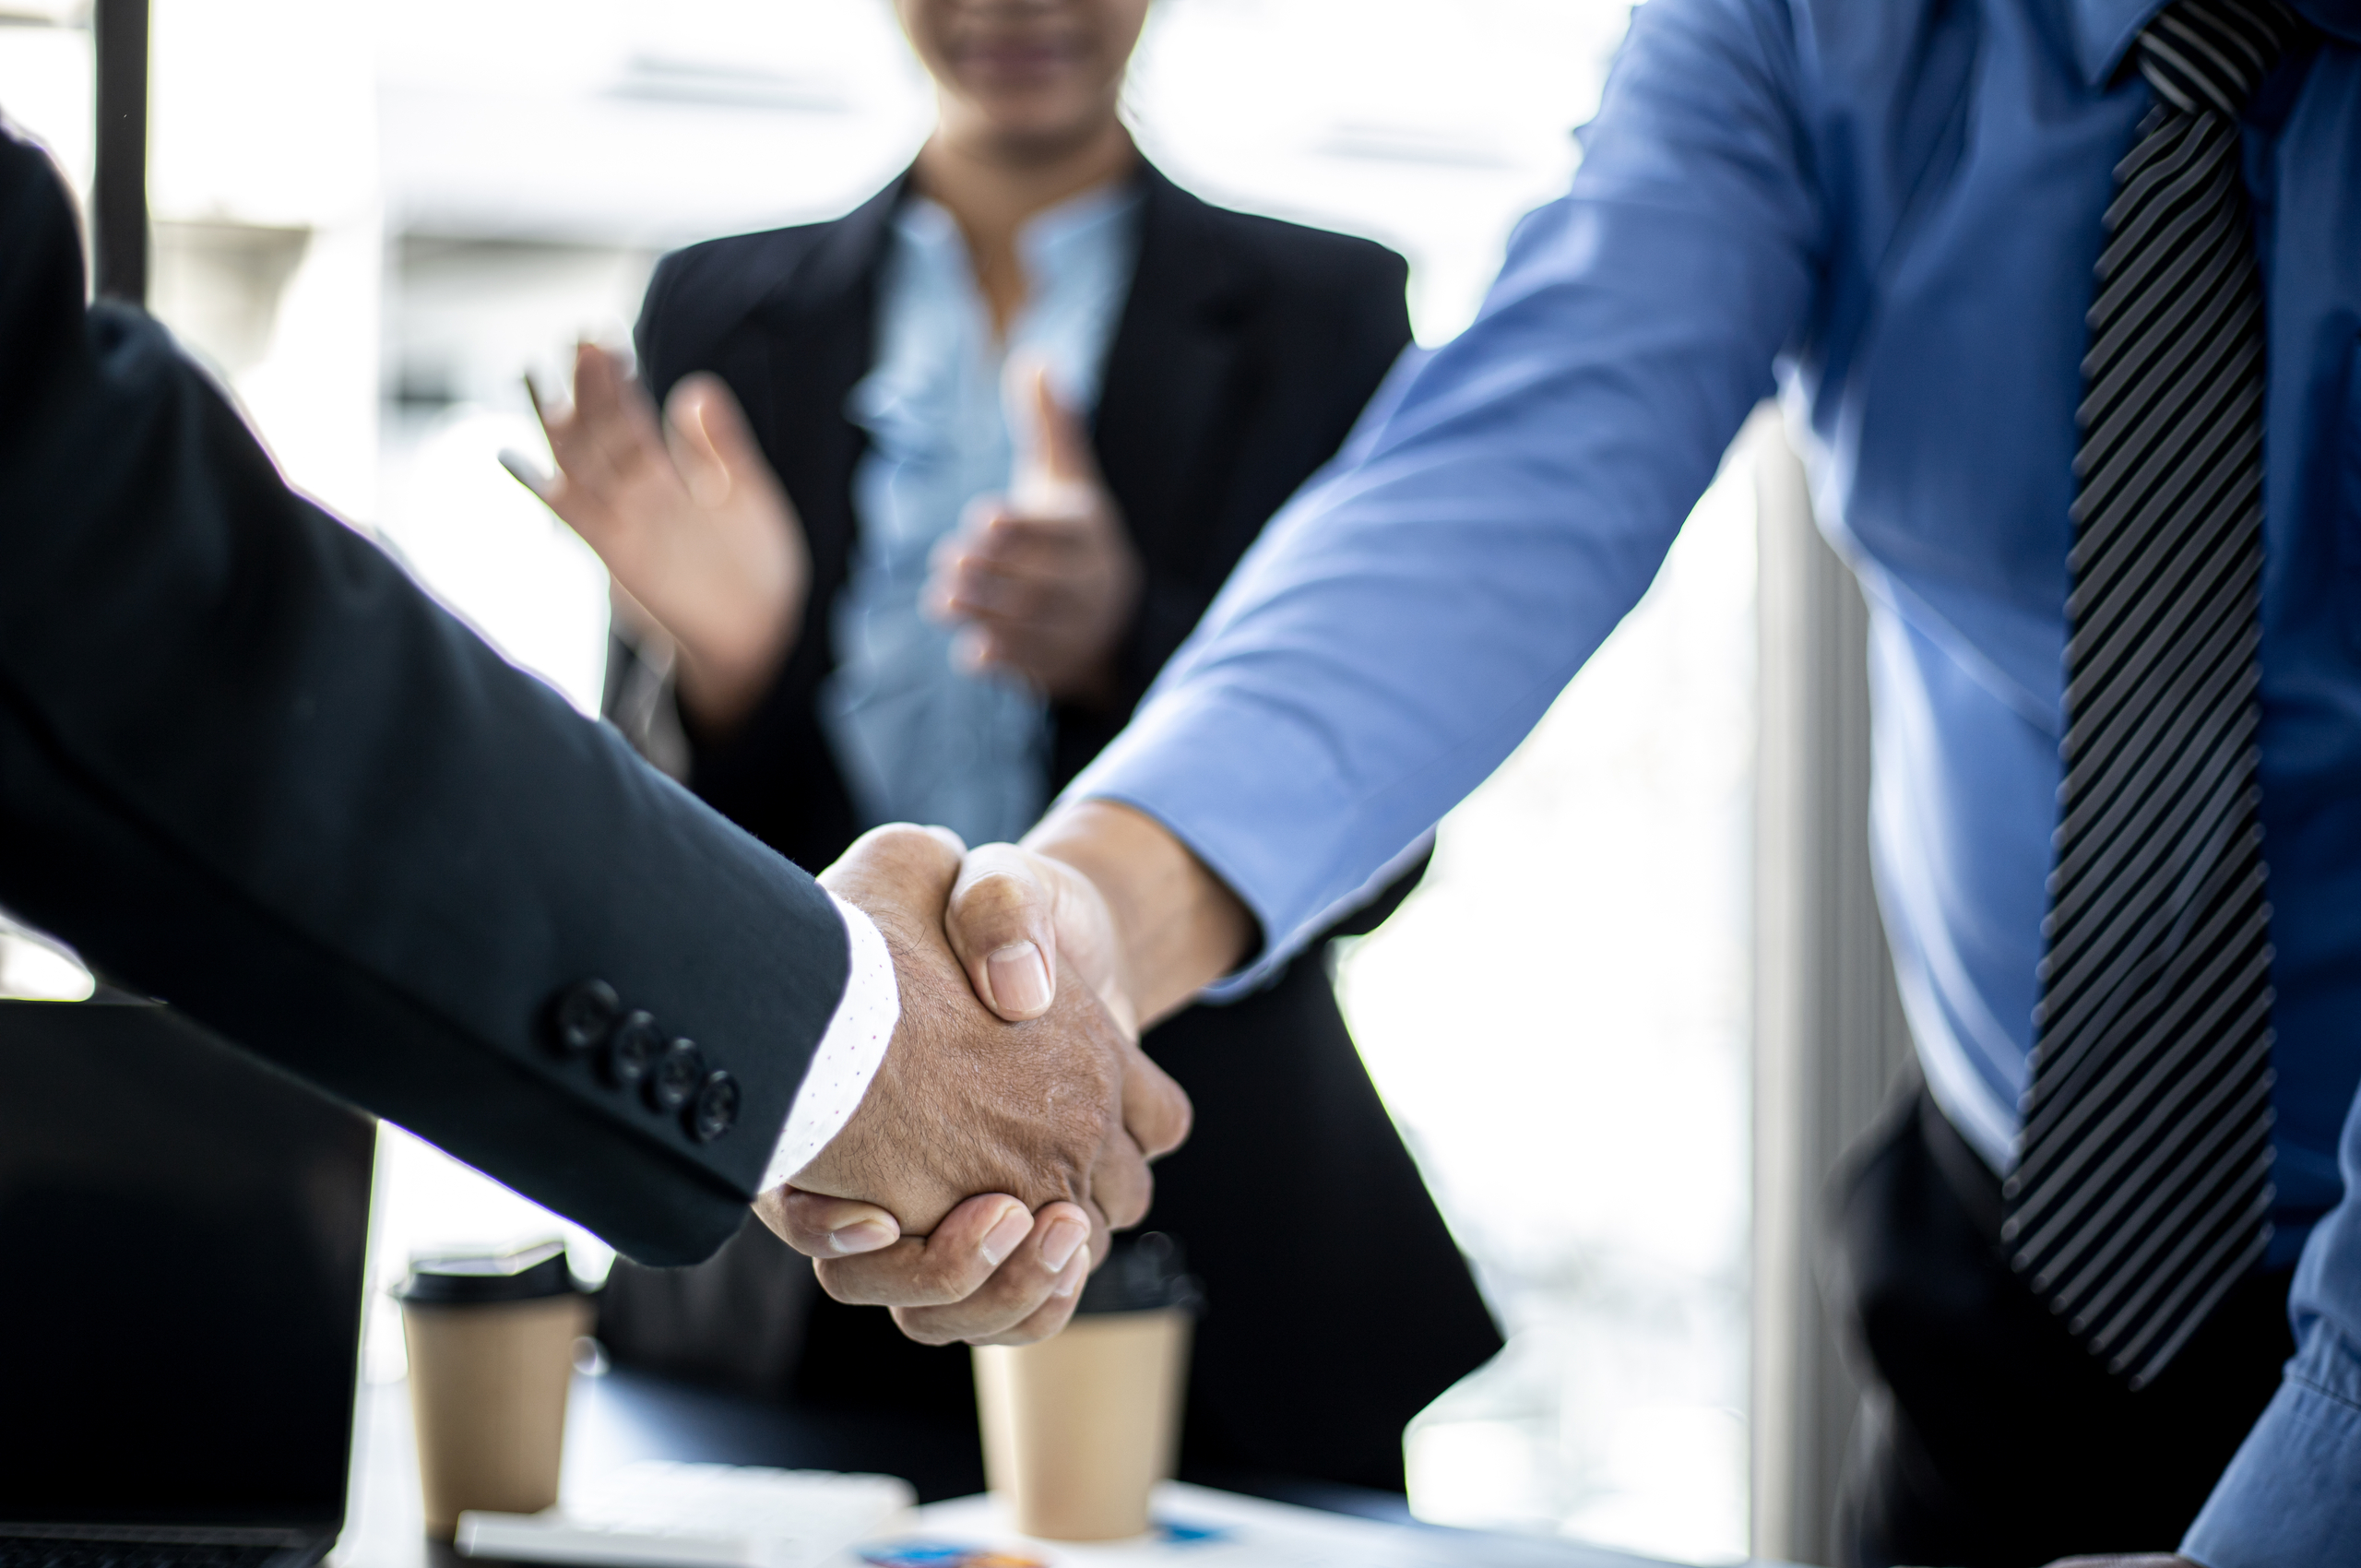 close-up of two businesspeople shaking hands